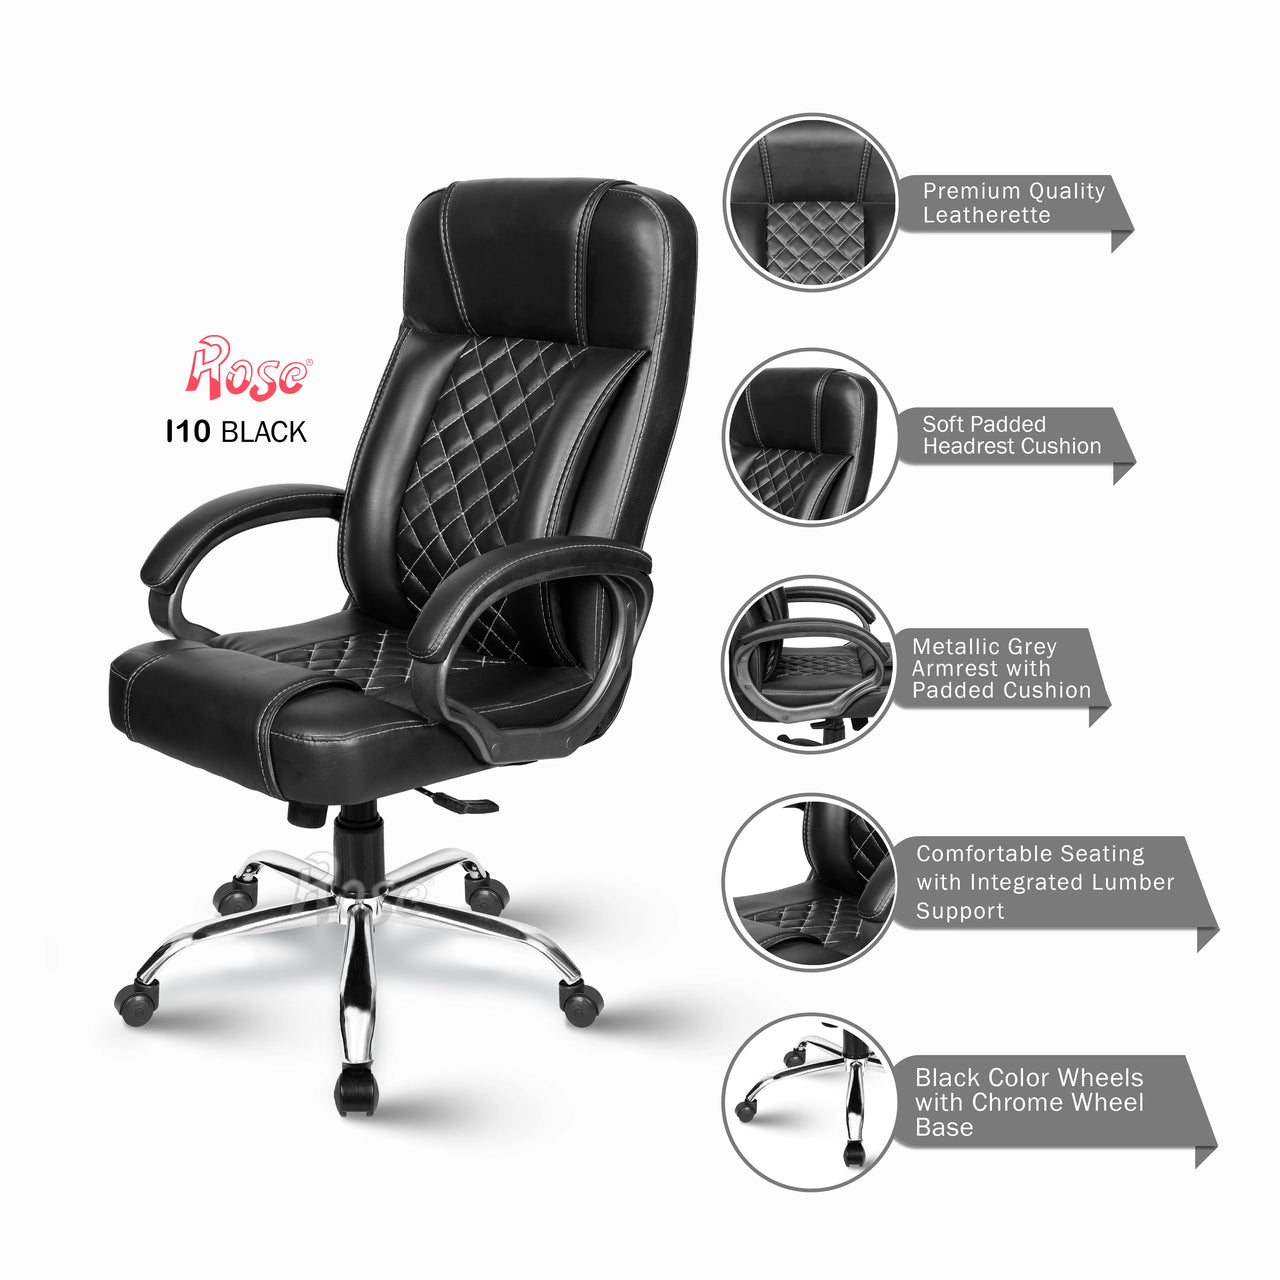 I10 Leatherette Executive High Back Revolving Office Chair (Black)